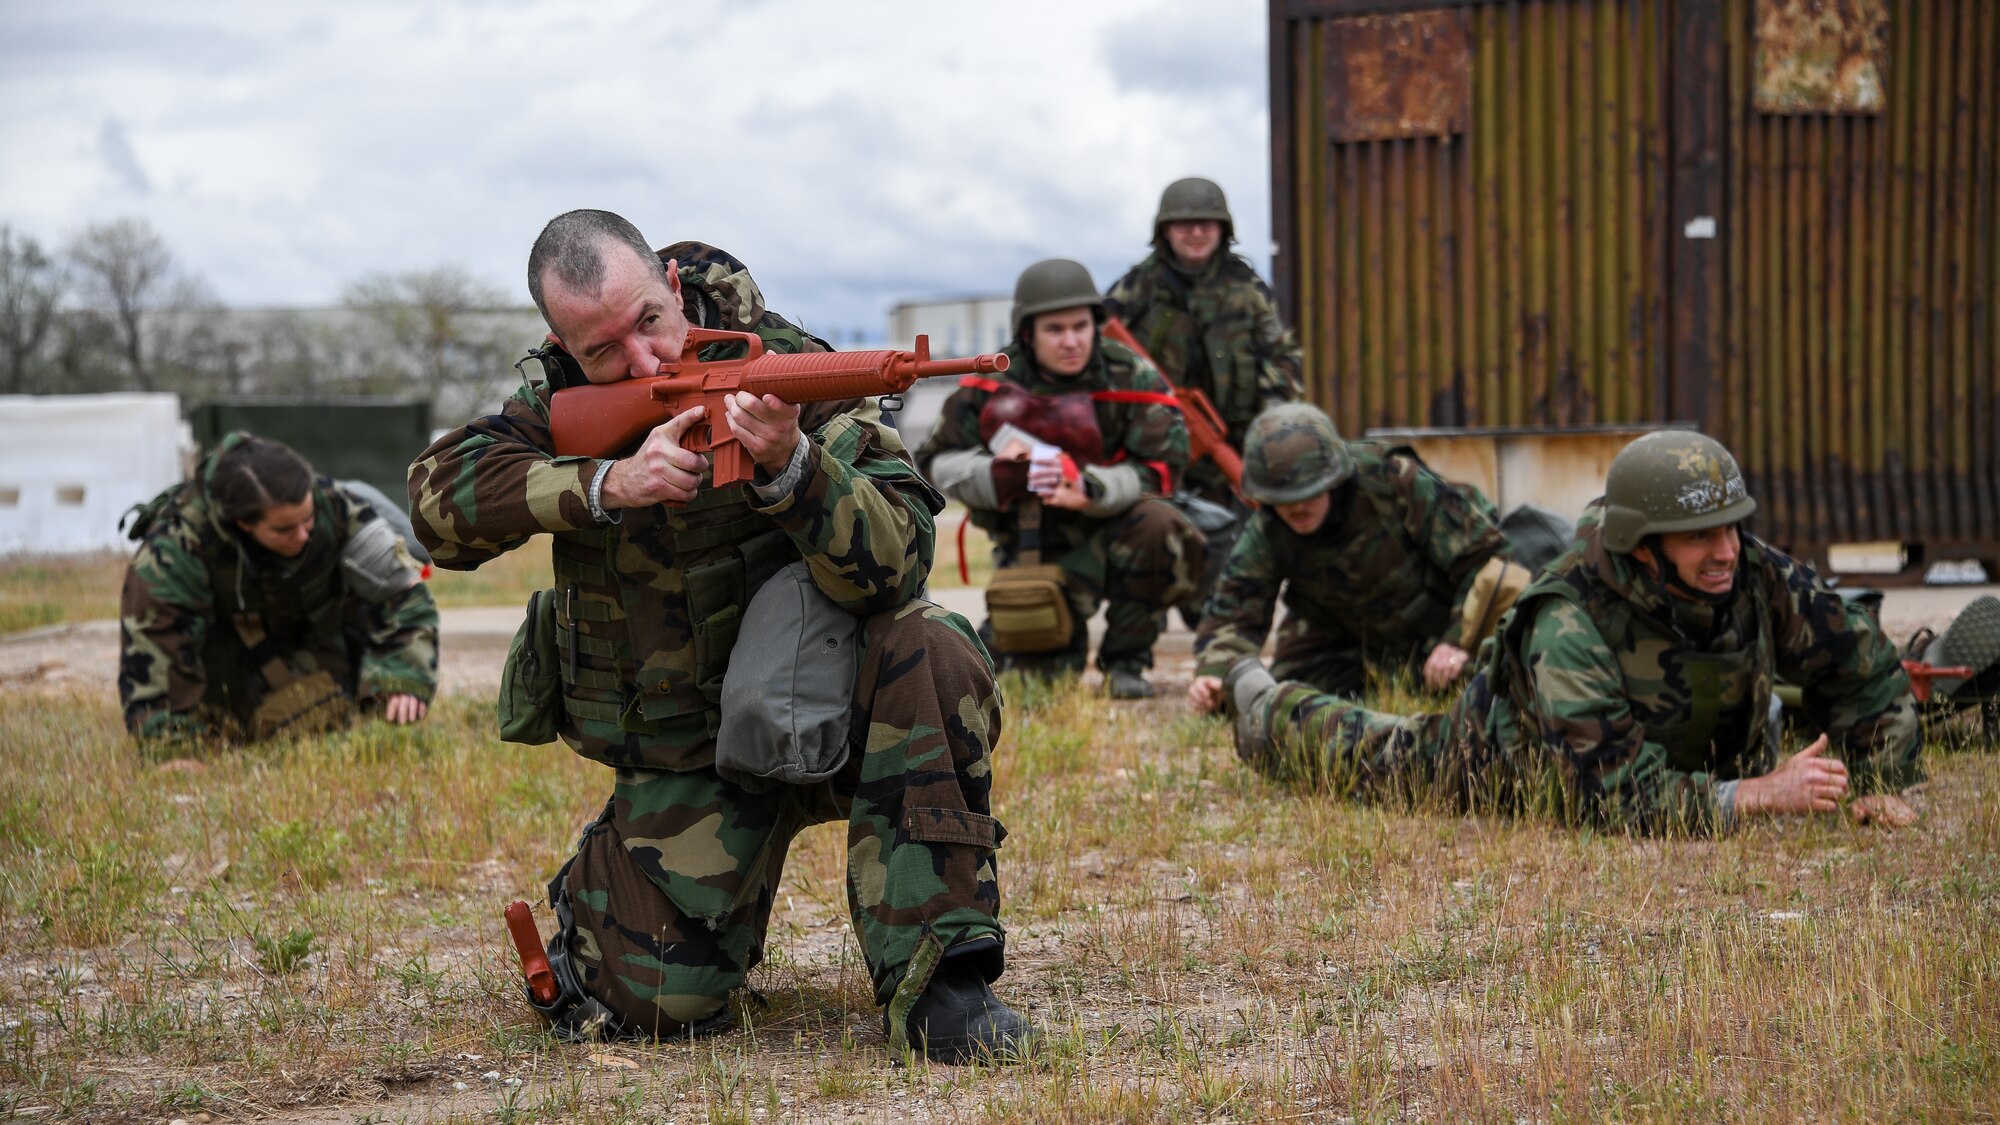 Airmen respond to an attack during an Contracting Directorate field exercise at Hill Air Force Base, Utah, May 22, 2019. The exercise simulated scenarios specific to the contracting mission in a deployed environment. Contracting specialists purchase supplies and services essential to operational continiuty and mission success. (U.S. Air Force photo by R. Nial Bradshaw)